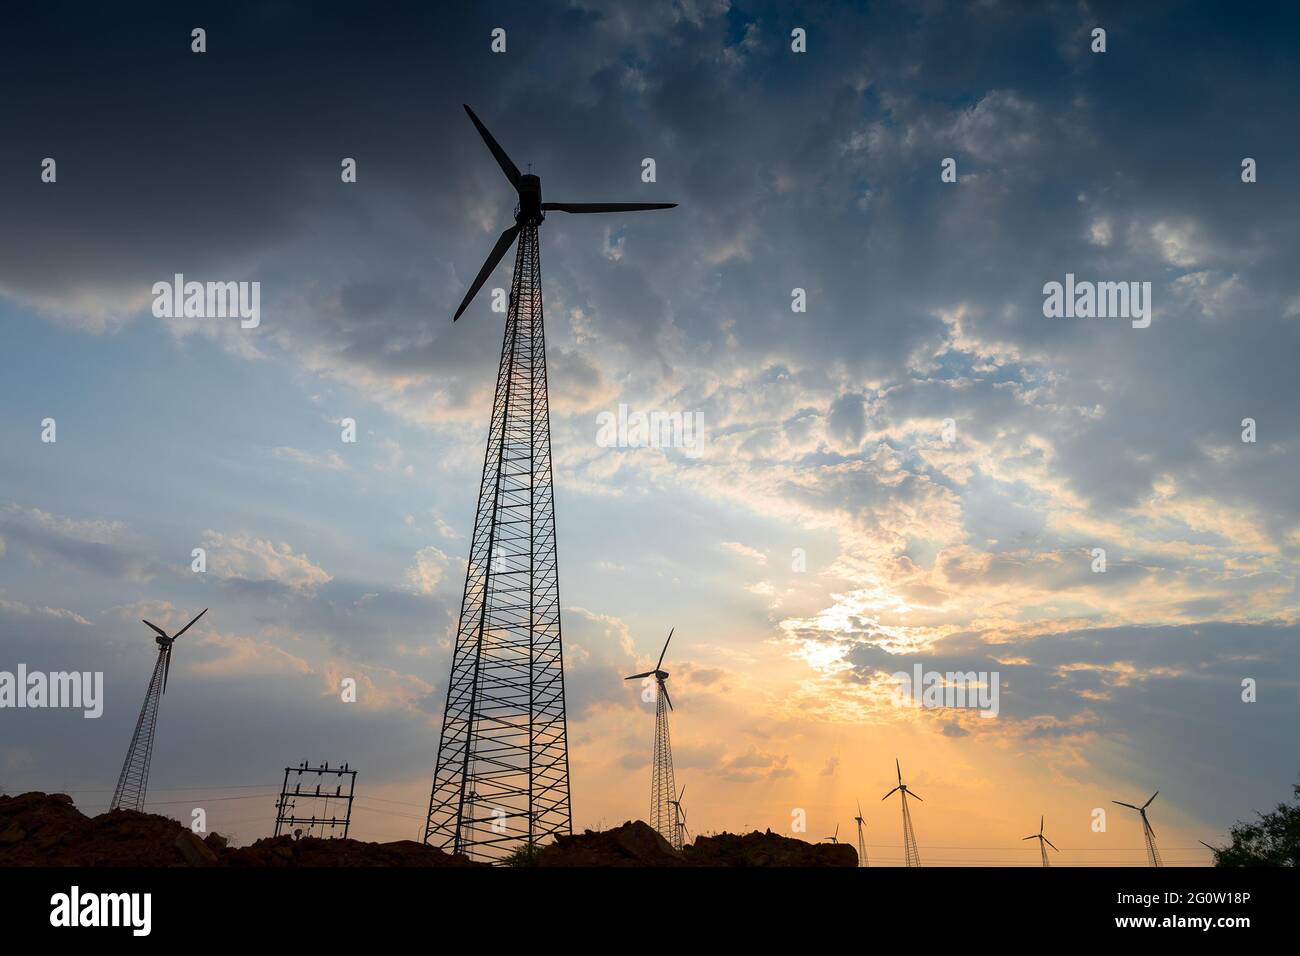 Silhouette of wind mills in twilight with a setting sun and cloudy sky in background, Rajasthan, India Stock Photo